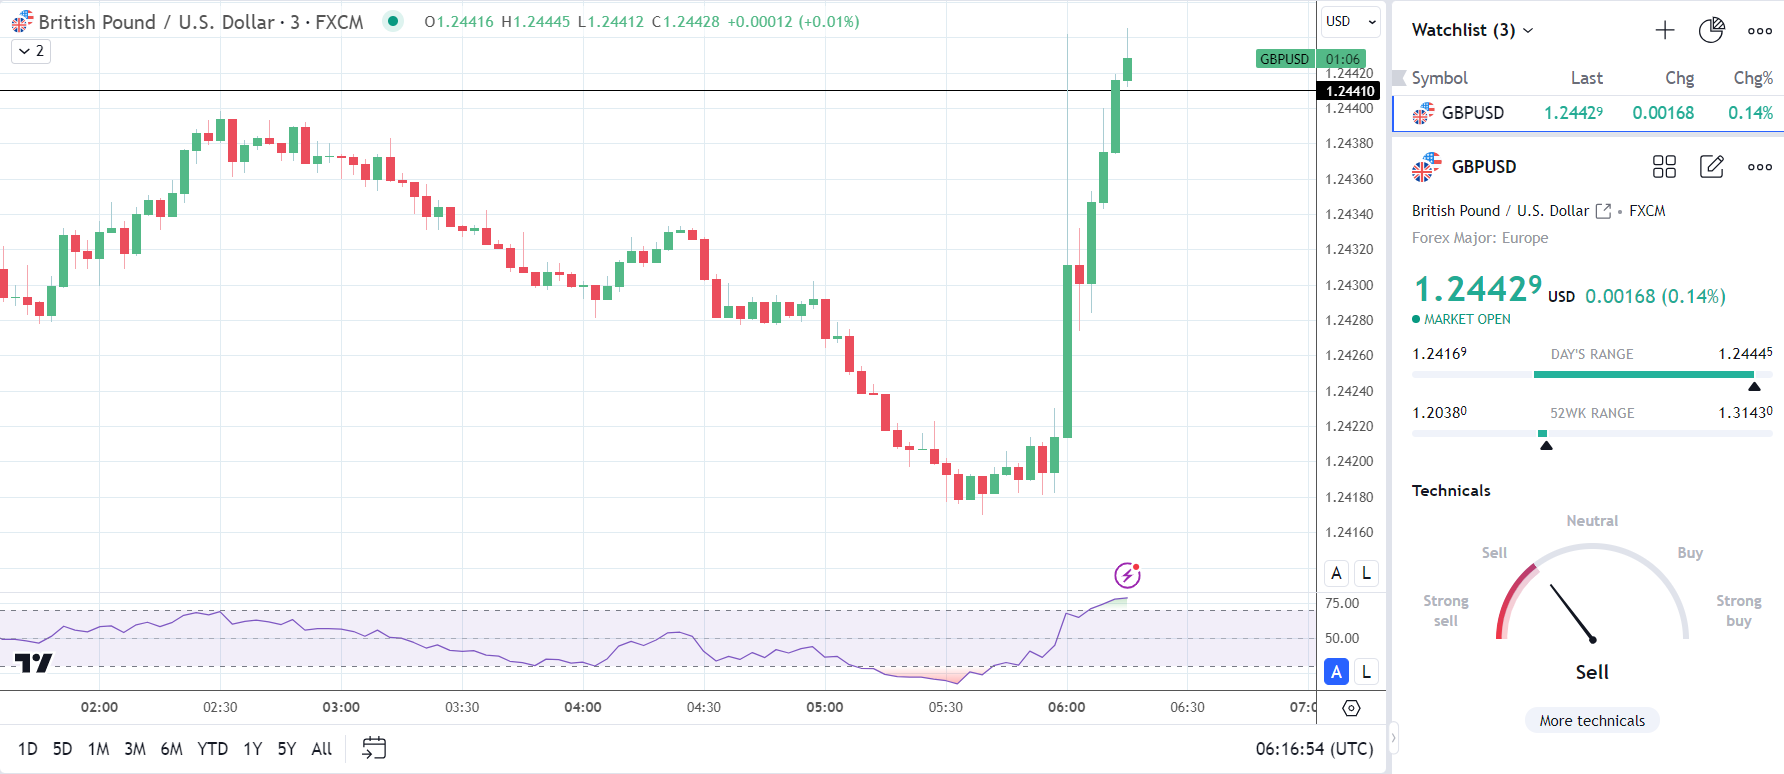 GBP/USD reacts to UK Annual Inflation Rate